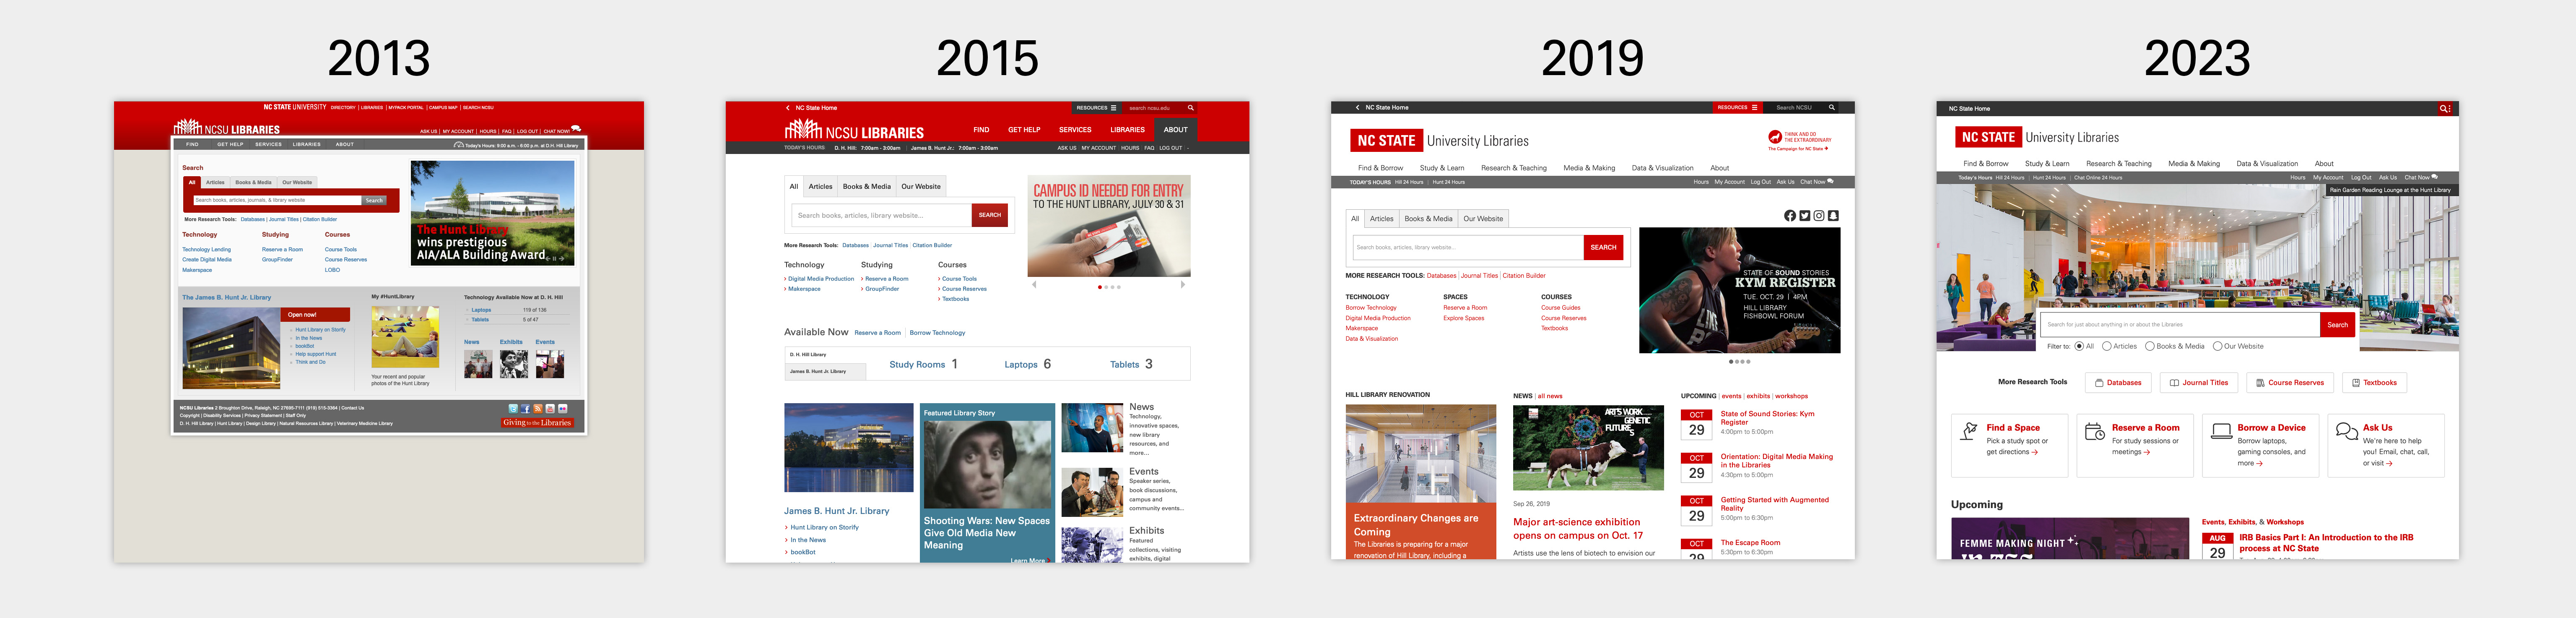 Homepage screenshots from 2013, 2015, 2019, and 2023